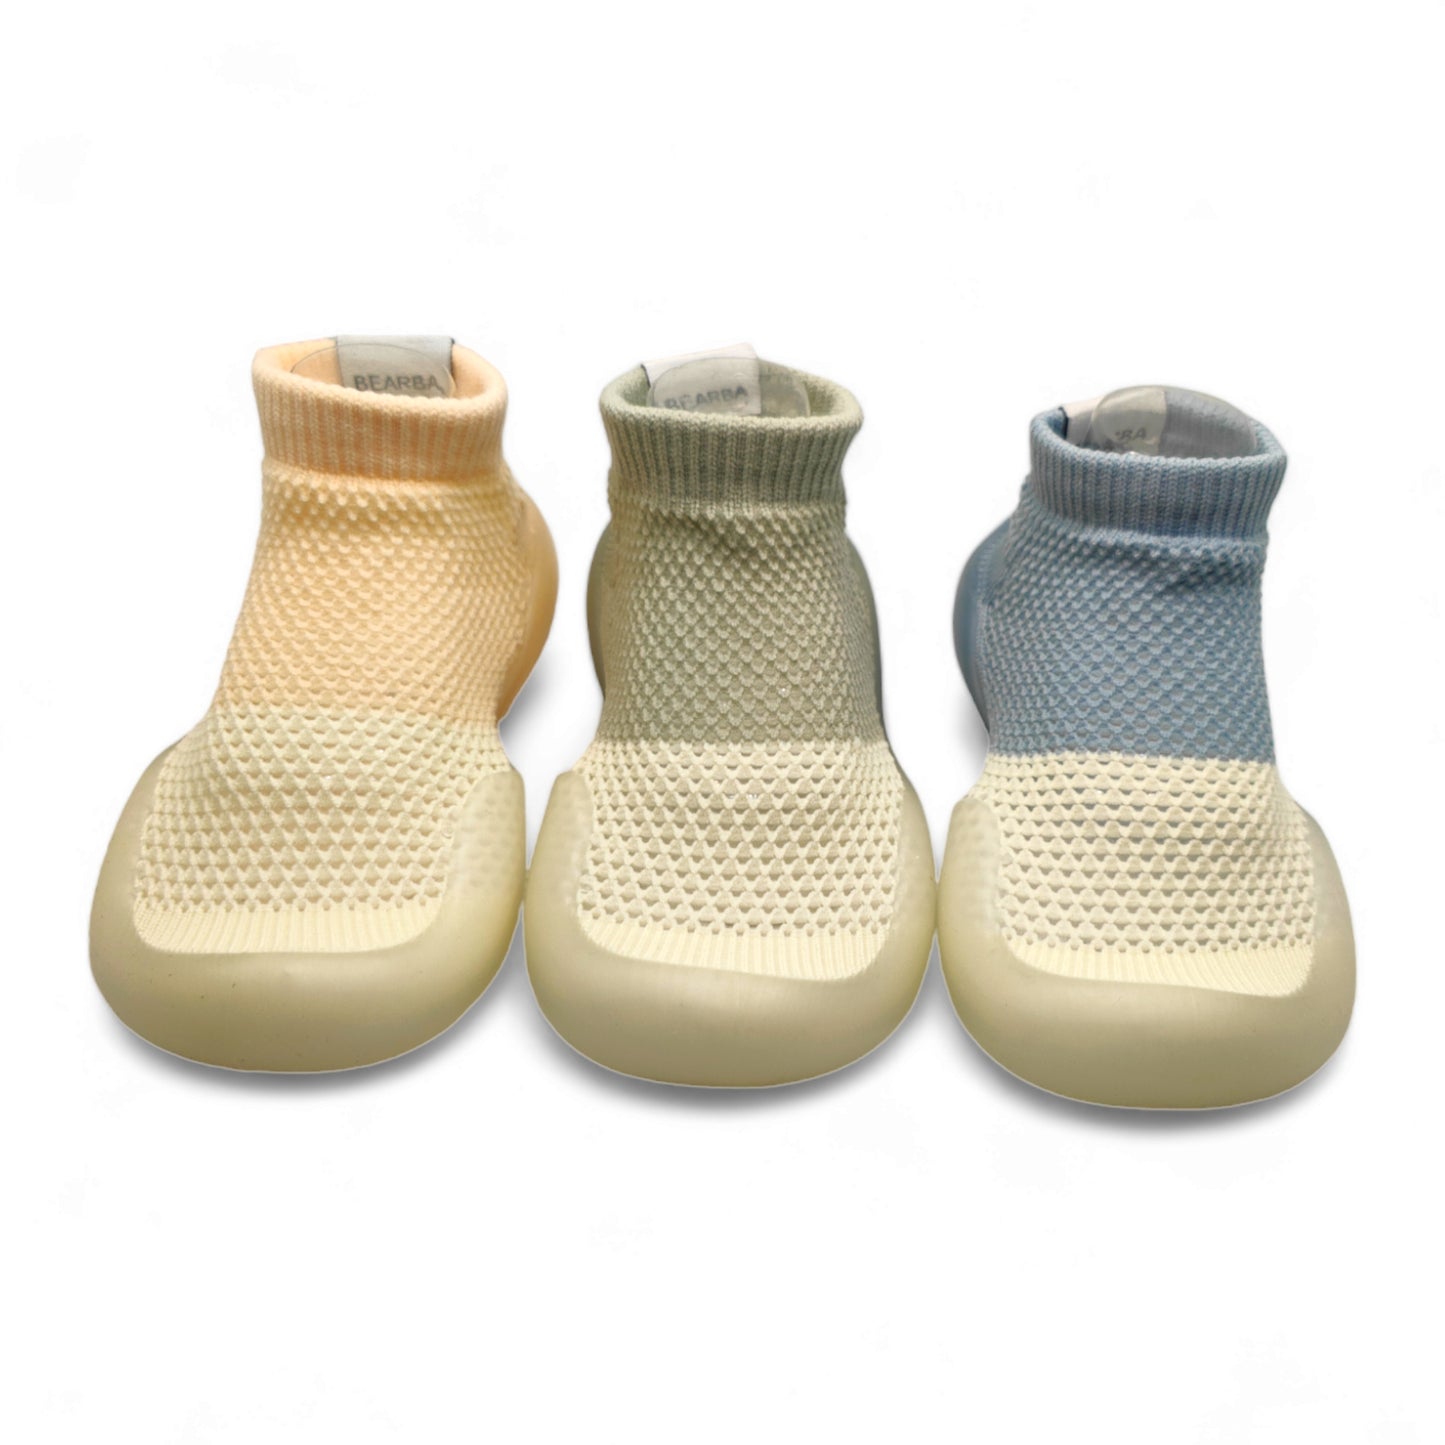 Trendsetter by Bearba- Sock Shoes for Babies & Toddlers Sizes-XS,S,M,L,XL-Flexible Soles, Lightweight, Machine Washable,3 Colours